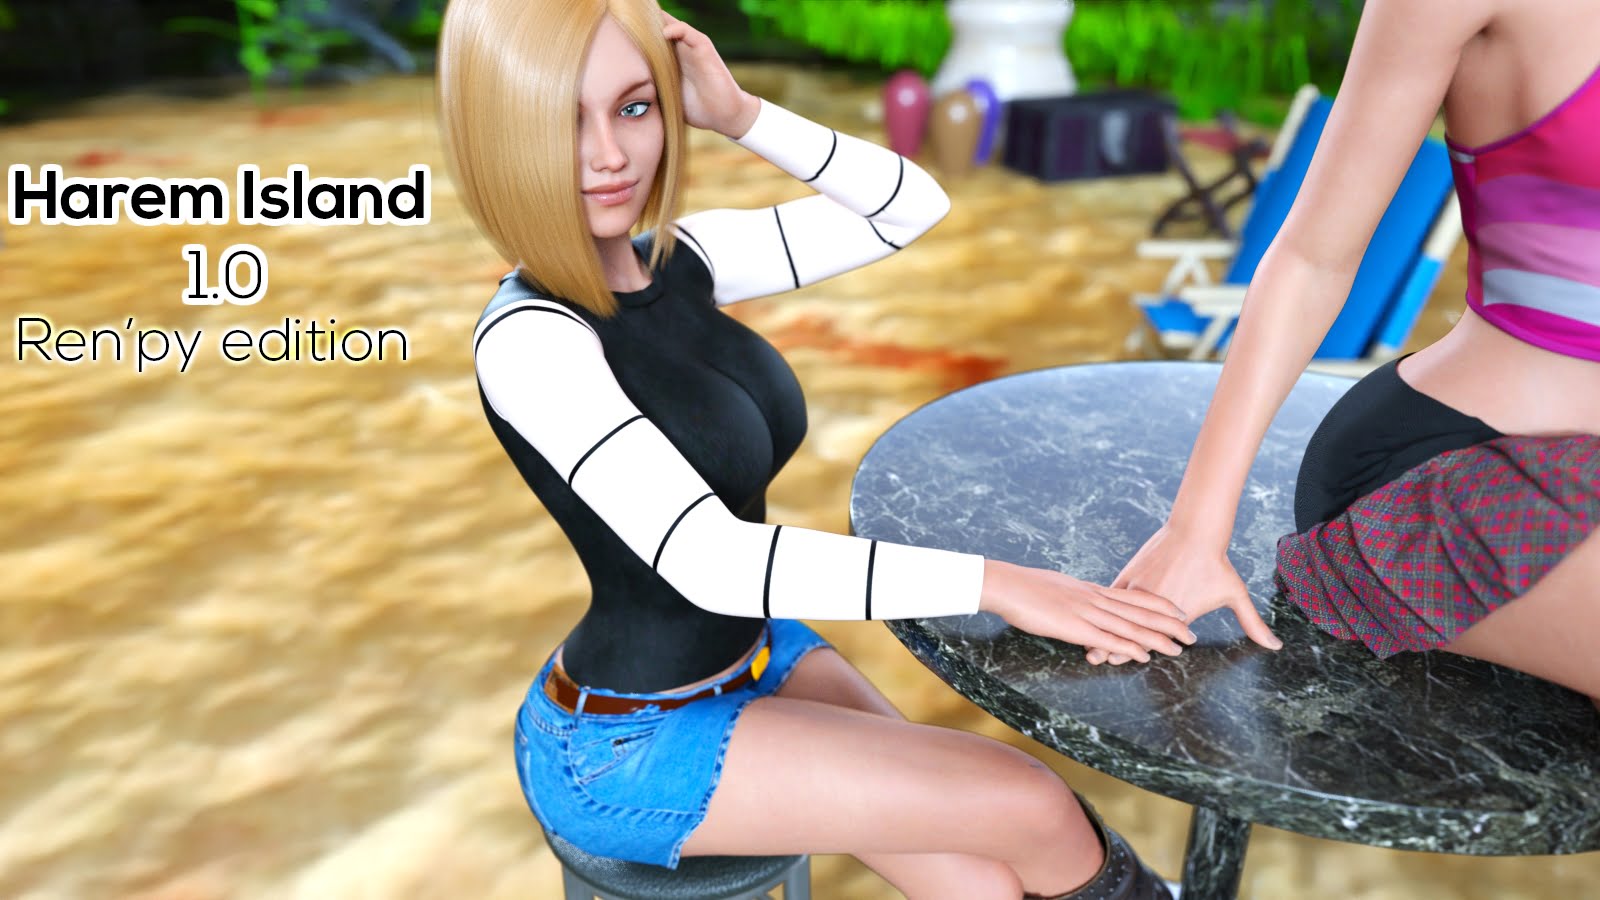 Harem Island Unofficial Ren'Py Version Ren'Py Porn Sex Game v.1.0 Download  for Windows, MacOS, Linux, Android